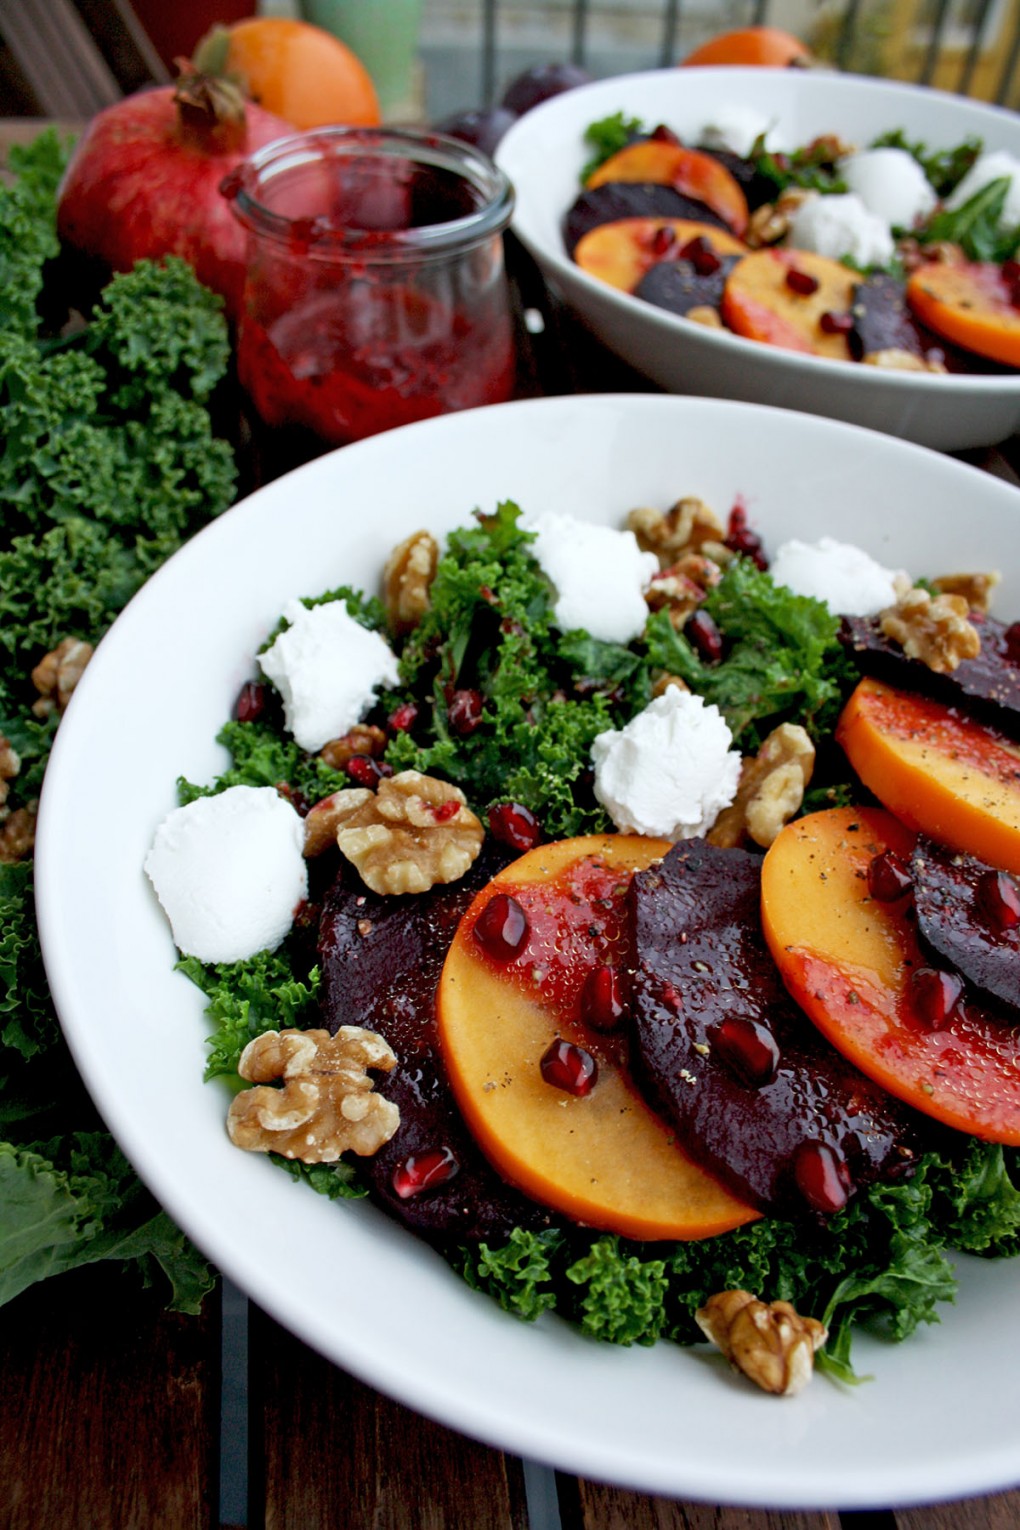 Beetroot Salad with Persimmon, Kale, Goat Cheese and Walnuts: Nutritious, delicious and flavorful 10 minutes salad. Perfect for a healthy fall lunch!